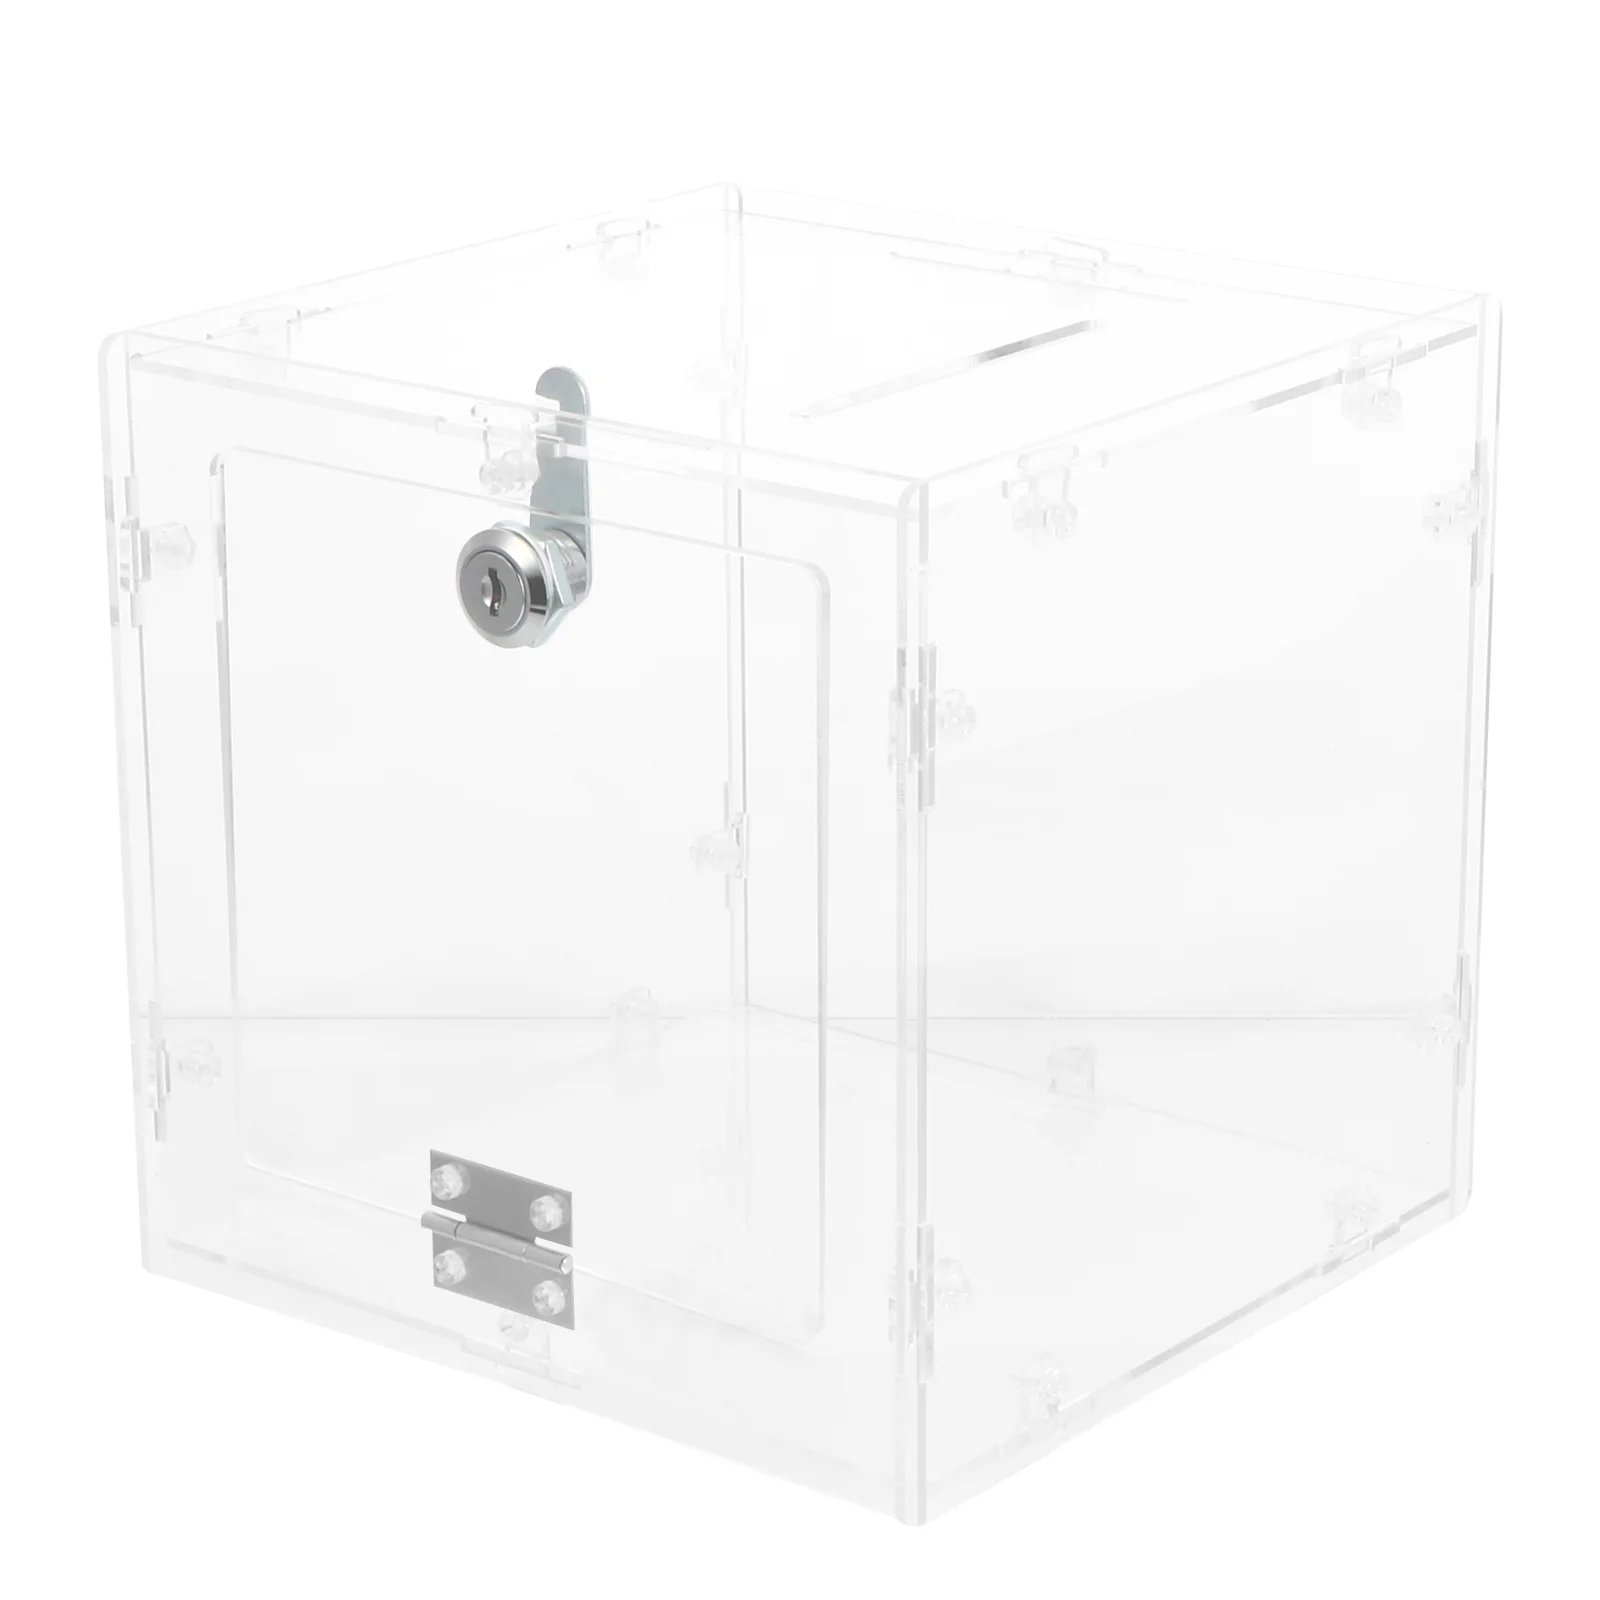 

Display Donation Box with Lock Clear Ballot Box Ticket Suggestion Container Voting Comment Box for Fundraising